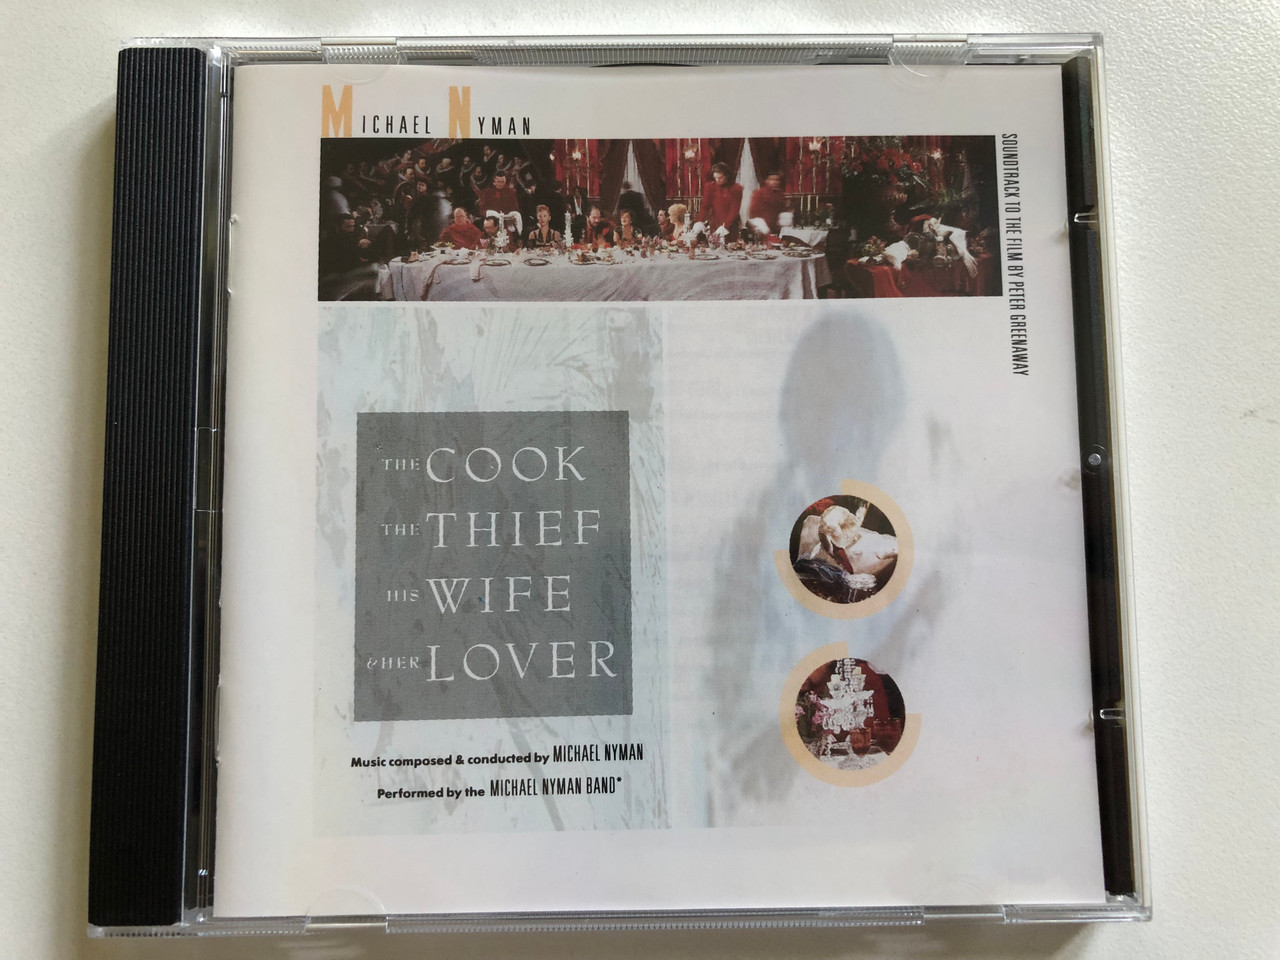 https://cdn10.bigcommerce.com/s-62bdpkt7pb/products/0/images/298433/Michael_Nyman_The_Cook_The_Thief_His_Wife_And_Her_Lover_-_Music_Composed_Conducted_By_Michael_Nyman_Performed_By_The_Michael_Nyman_Band_Soundtrack_To_The_Film_By_Peter_Greenaway_Virgin_1__69022.1693820951.1280.1280.JPG?c=2&_gl=1*8ql2tu*_ga*MjA2NTIxMjE2MC4xNTkwNTEyNTMy*_ga_WS2VZYPC6G*MTY5MzgxNDQzNy4xMDU3LjEuMTY5MzgyMDUyMy41MC4wLjA.